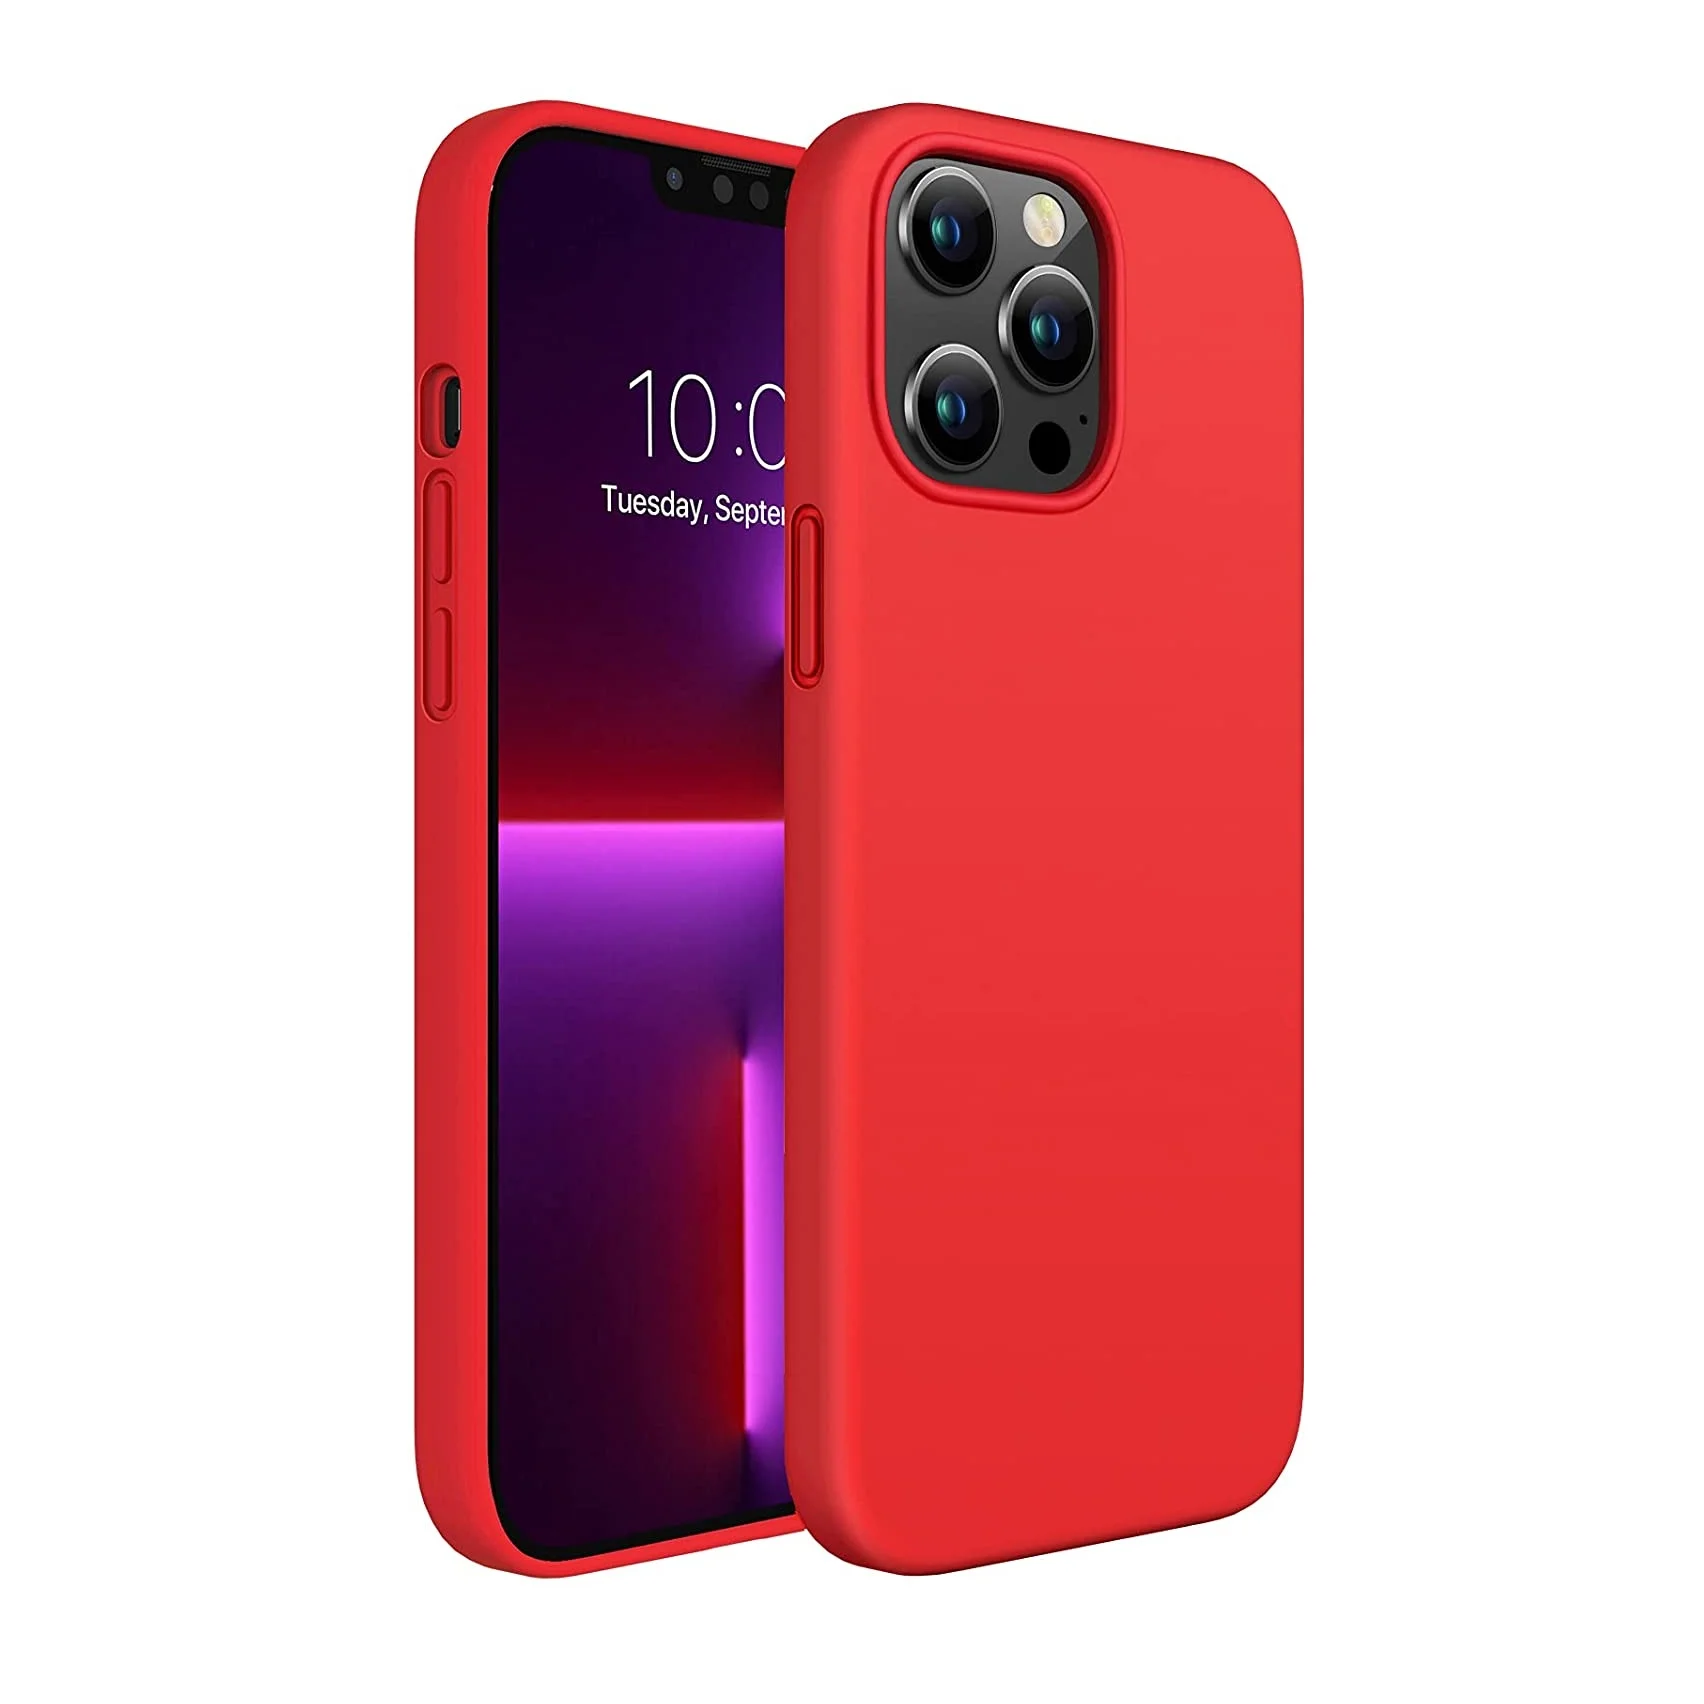 Luxury Brand Red Designed 3D Bottom Designer Silicone Phone Case for iPhone  7 7plus 8 X Xs Max Xr 11 PRO 12 Mini Back Cover - China Phone Case and  Silicone Liquid